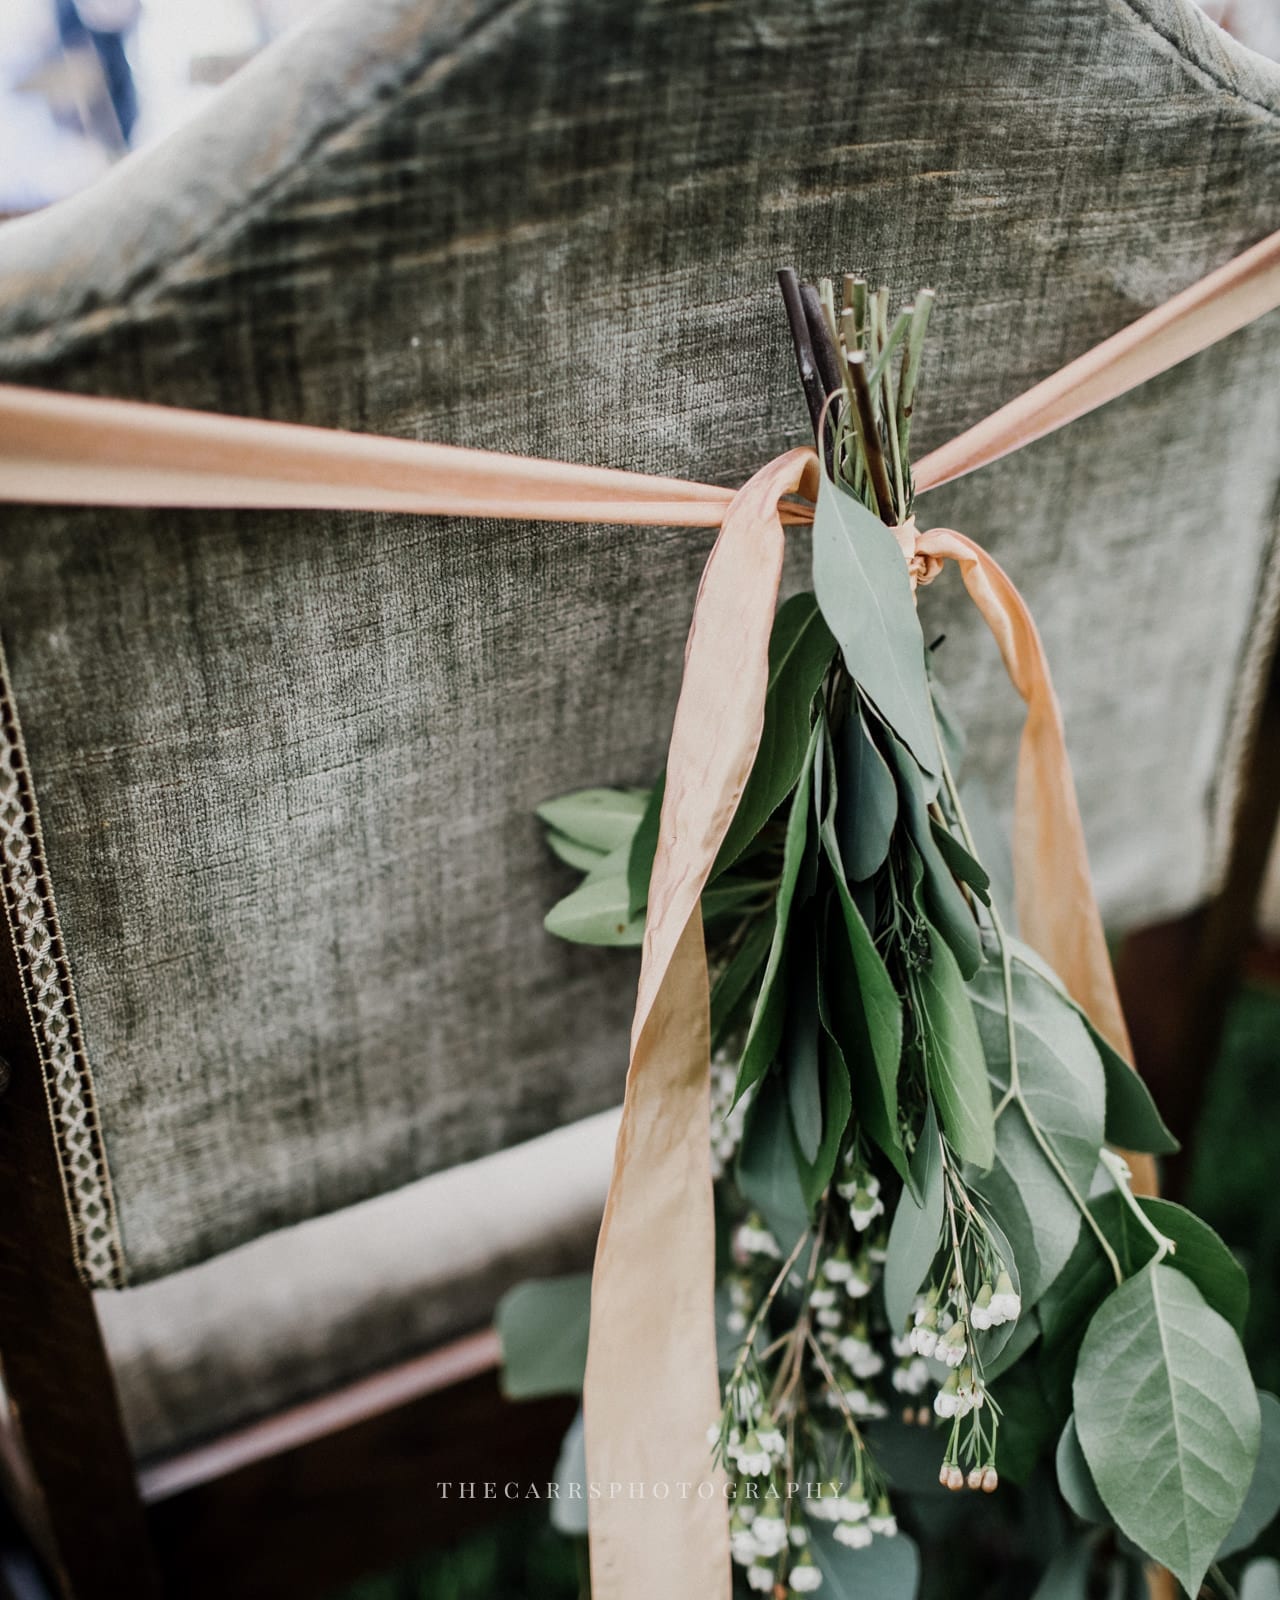 greens tied behind chair at Eckers Apple Farm Wedding - Destination Photographer